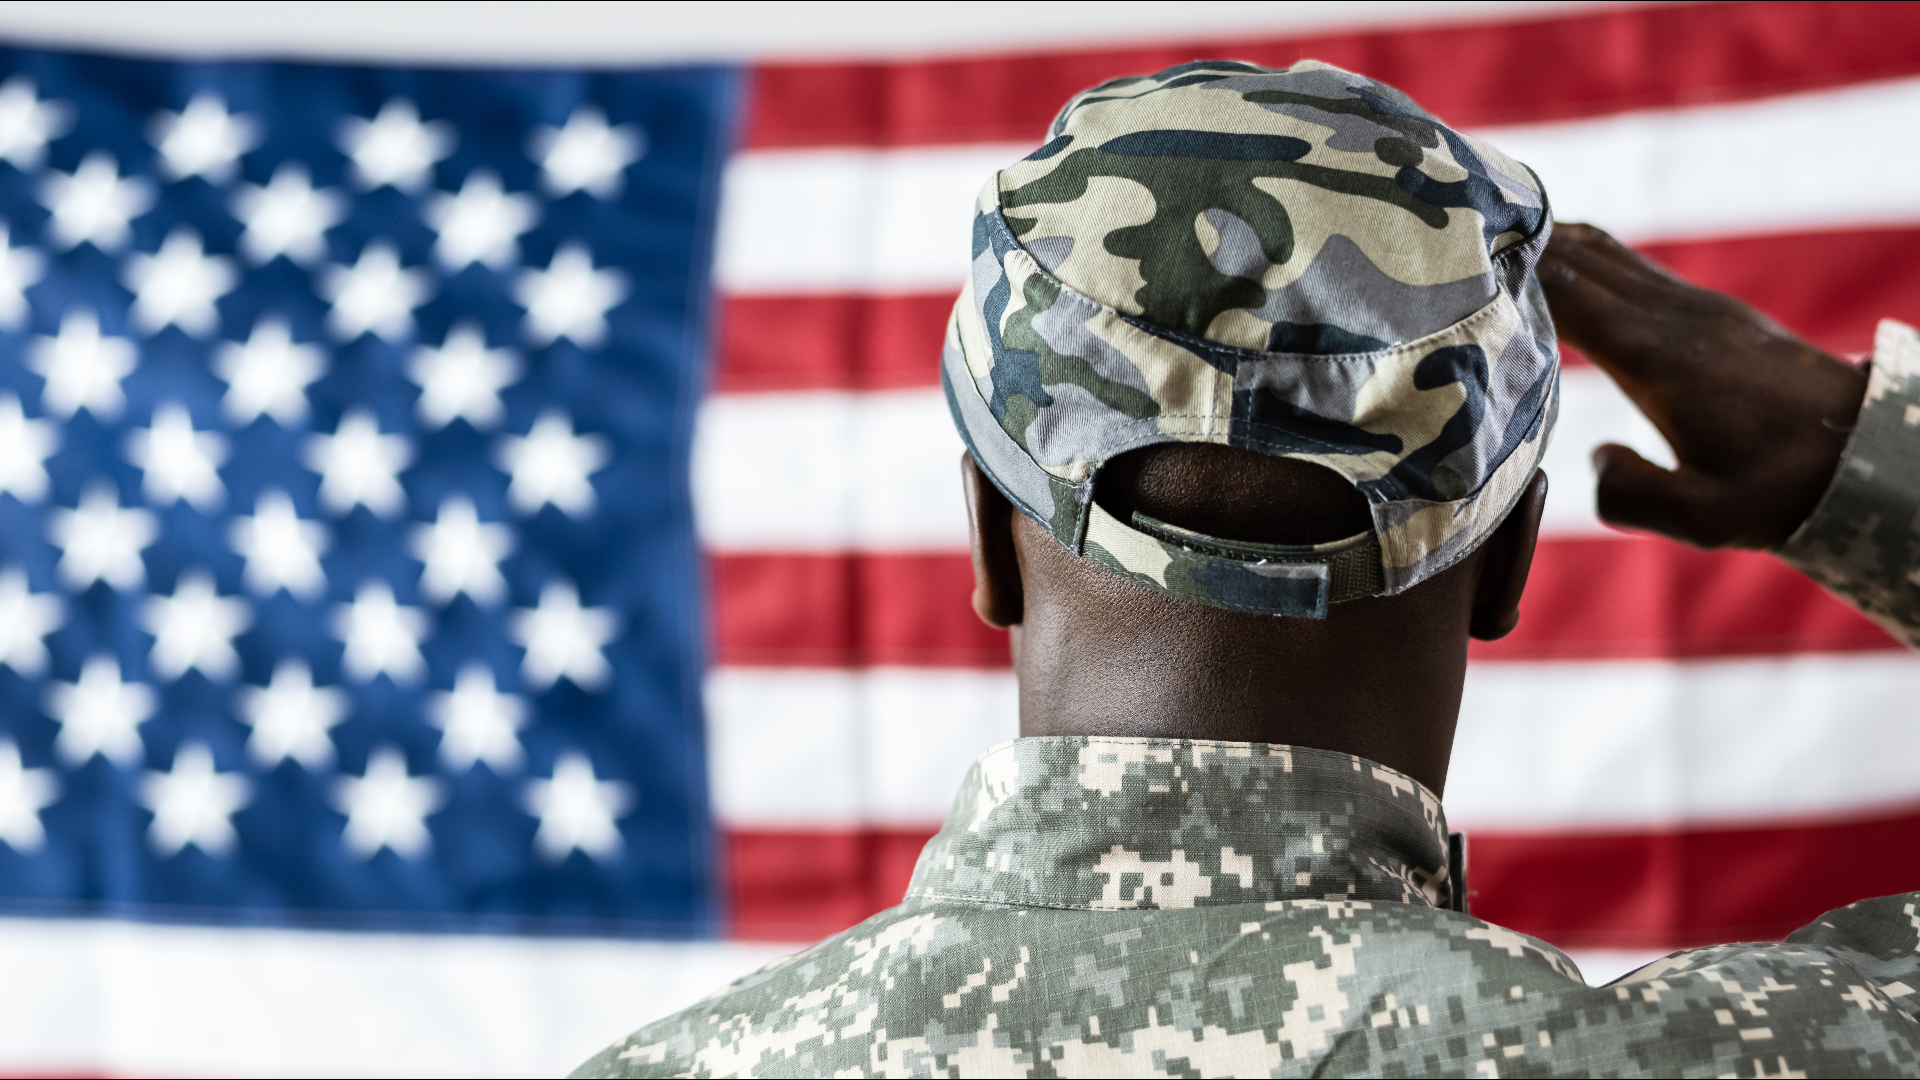 After their military service, many veterans of Color have unique challenges navigating civilian life. Race and Culture contributor Shay Johnson explains.